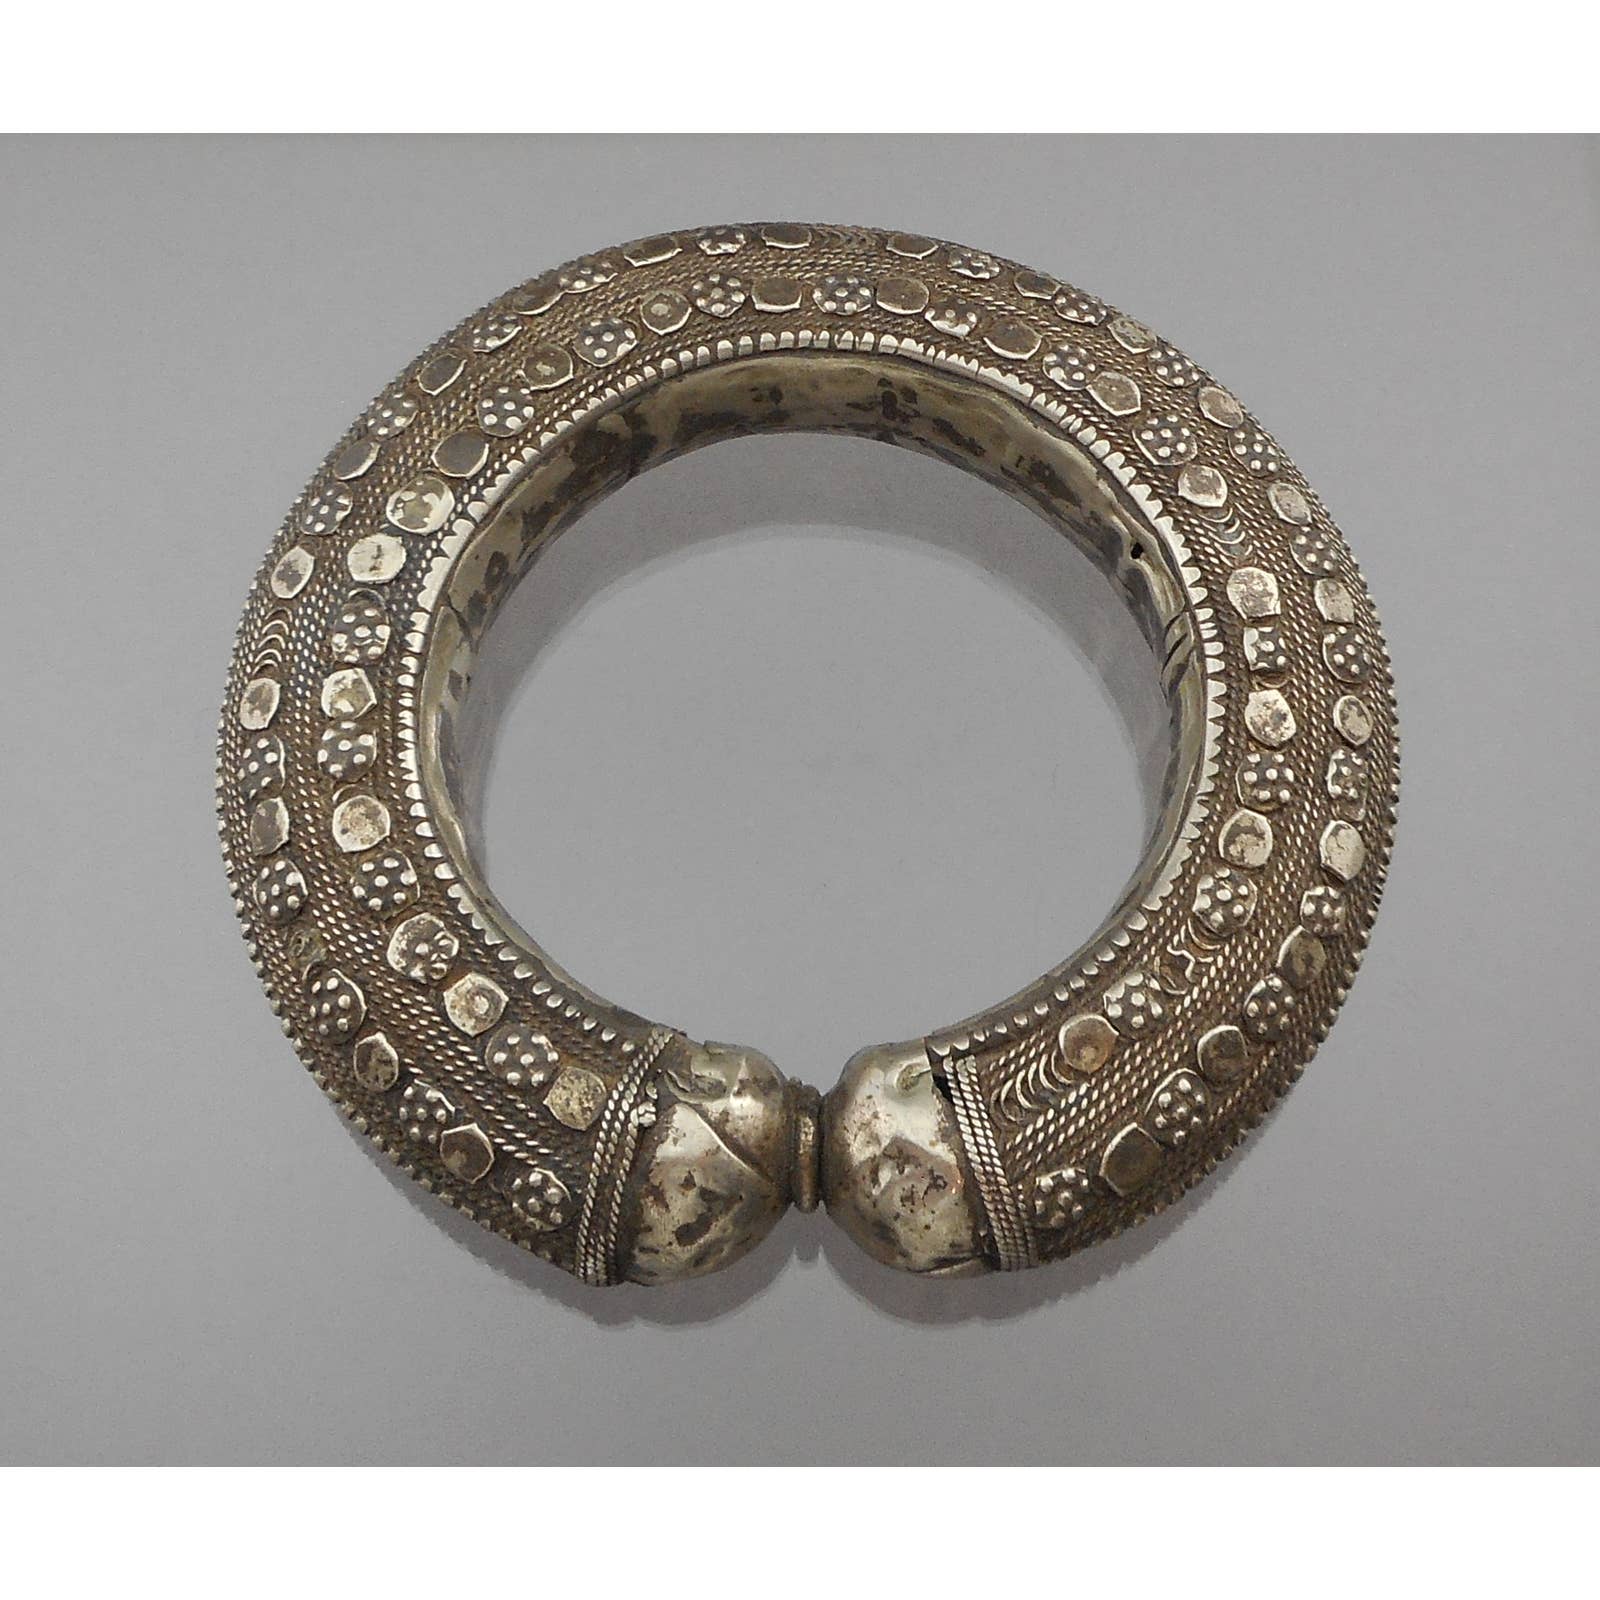 Antique Indian Silver Bracelet for Small Wrist – Anteeka